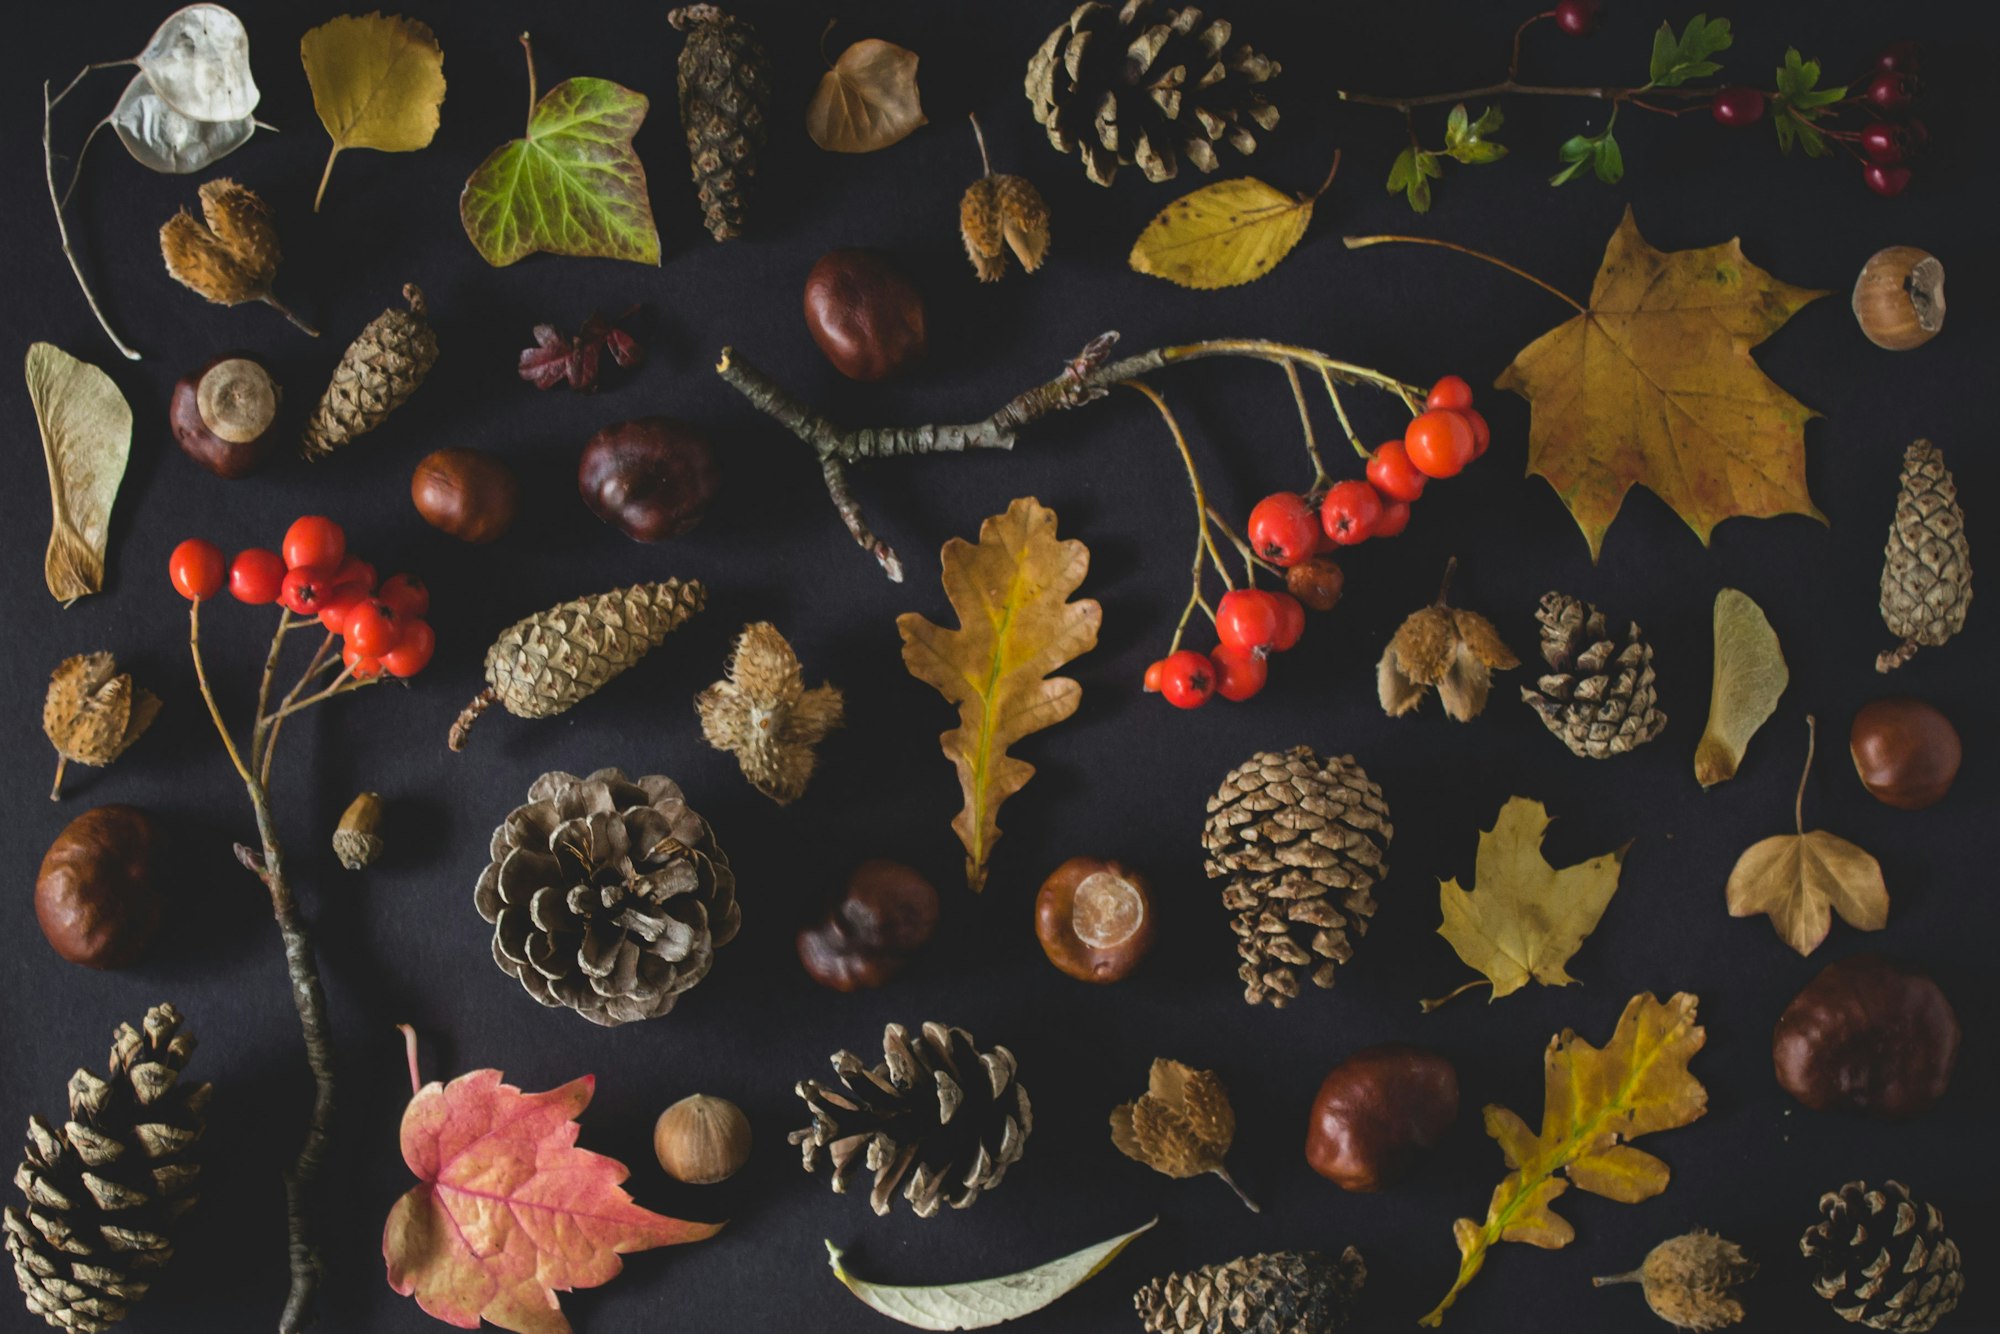 A small collection of beautiful autumnal gems I picked on my walk one day in Dublin.